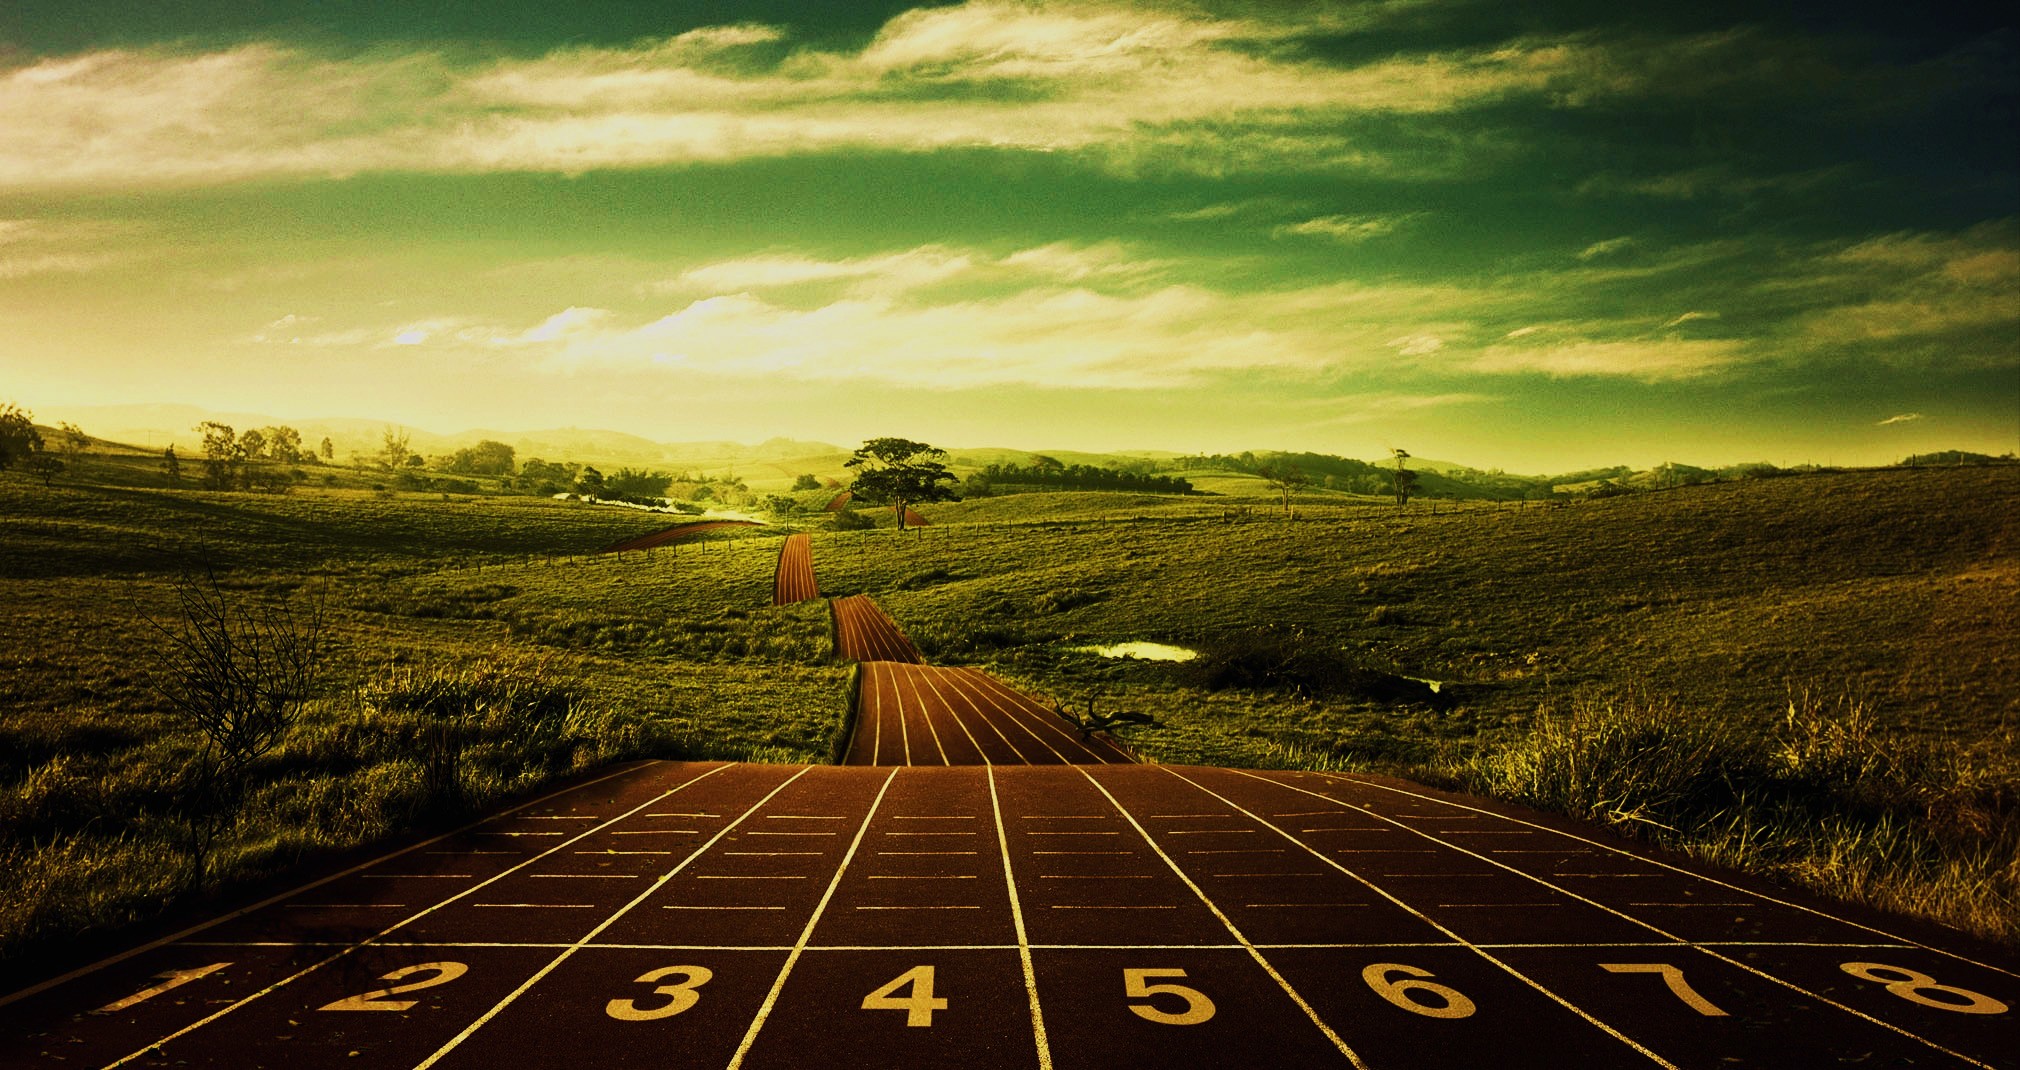 Circuits jogging running wallpaper   179411   High Quality and 2020x1070